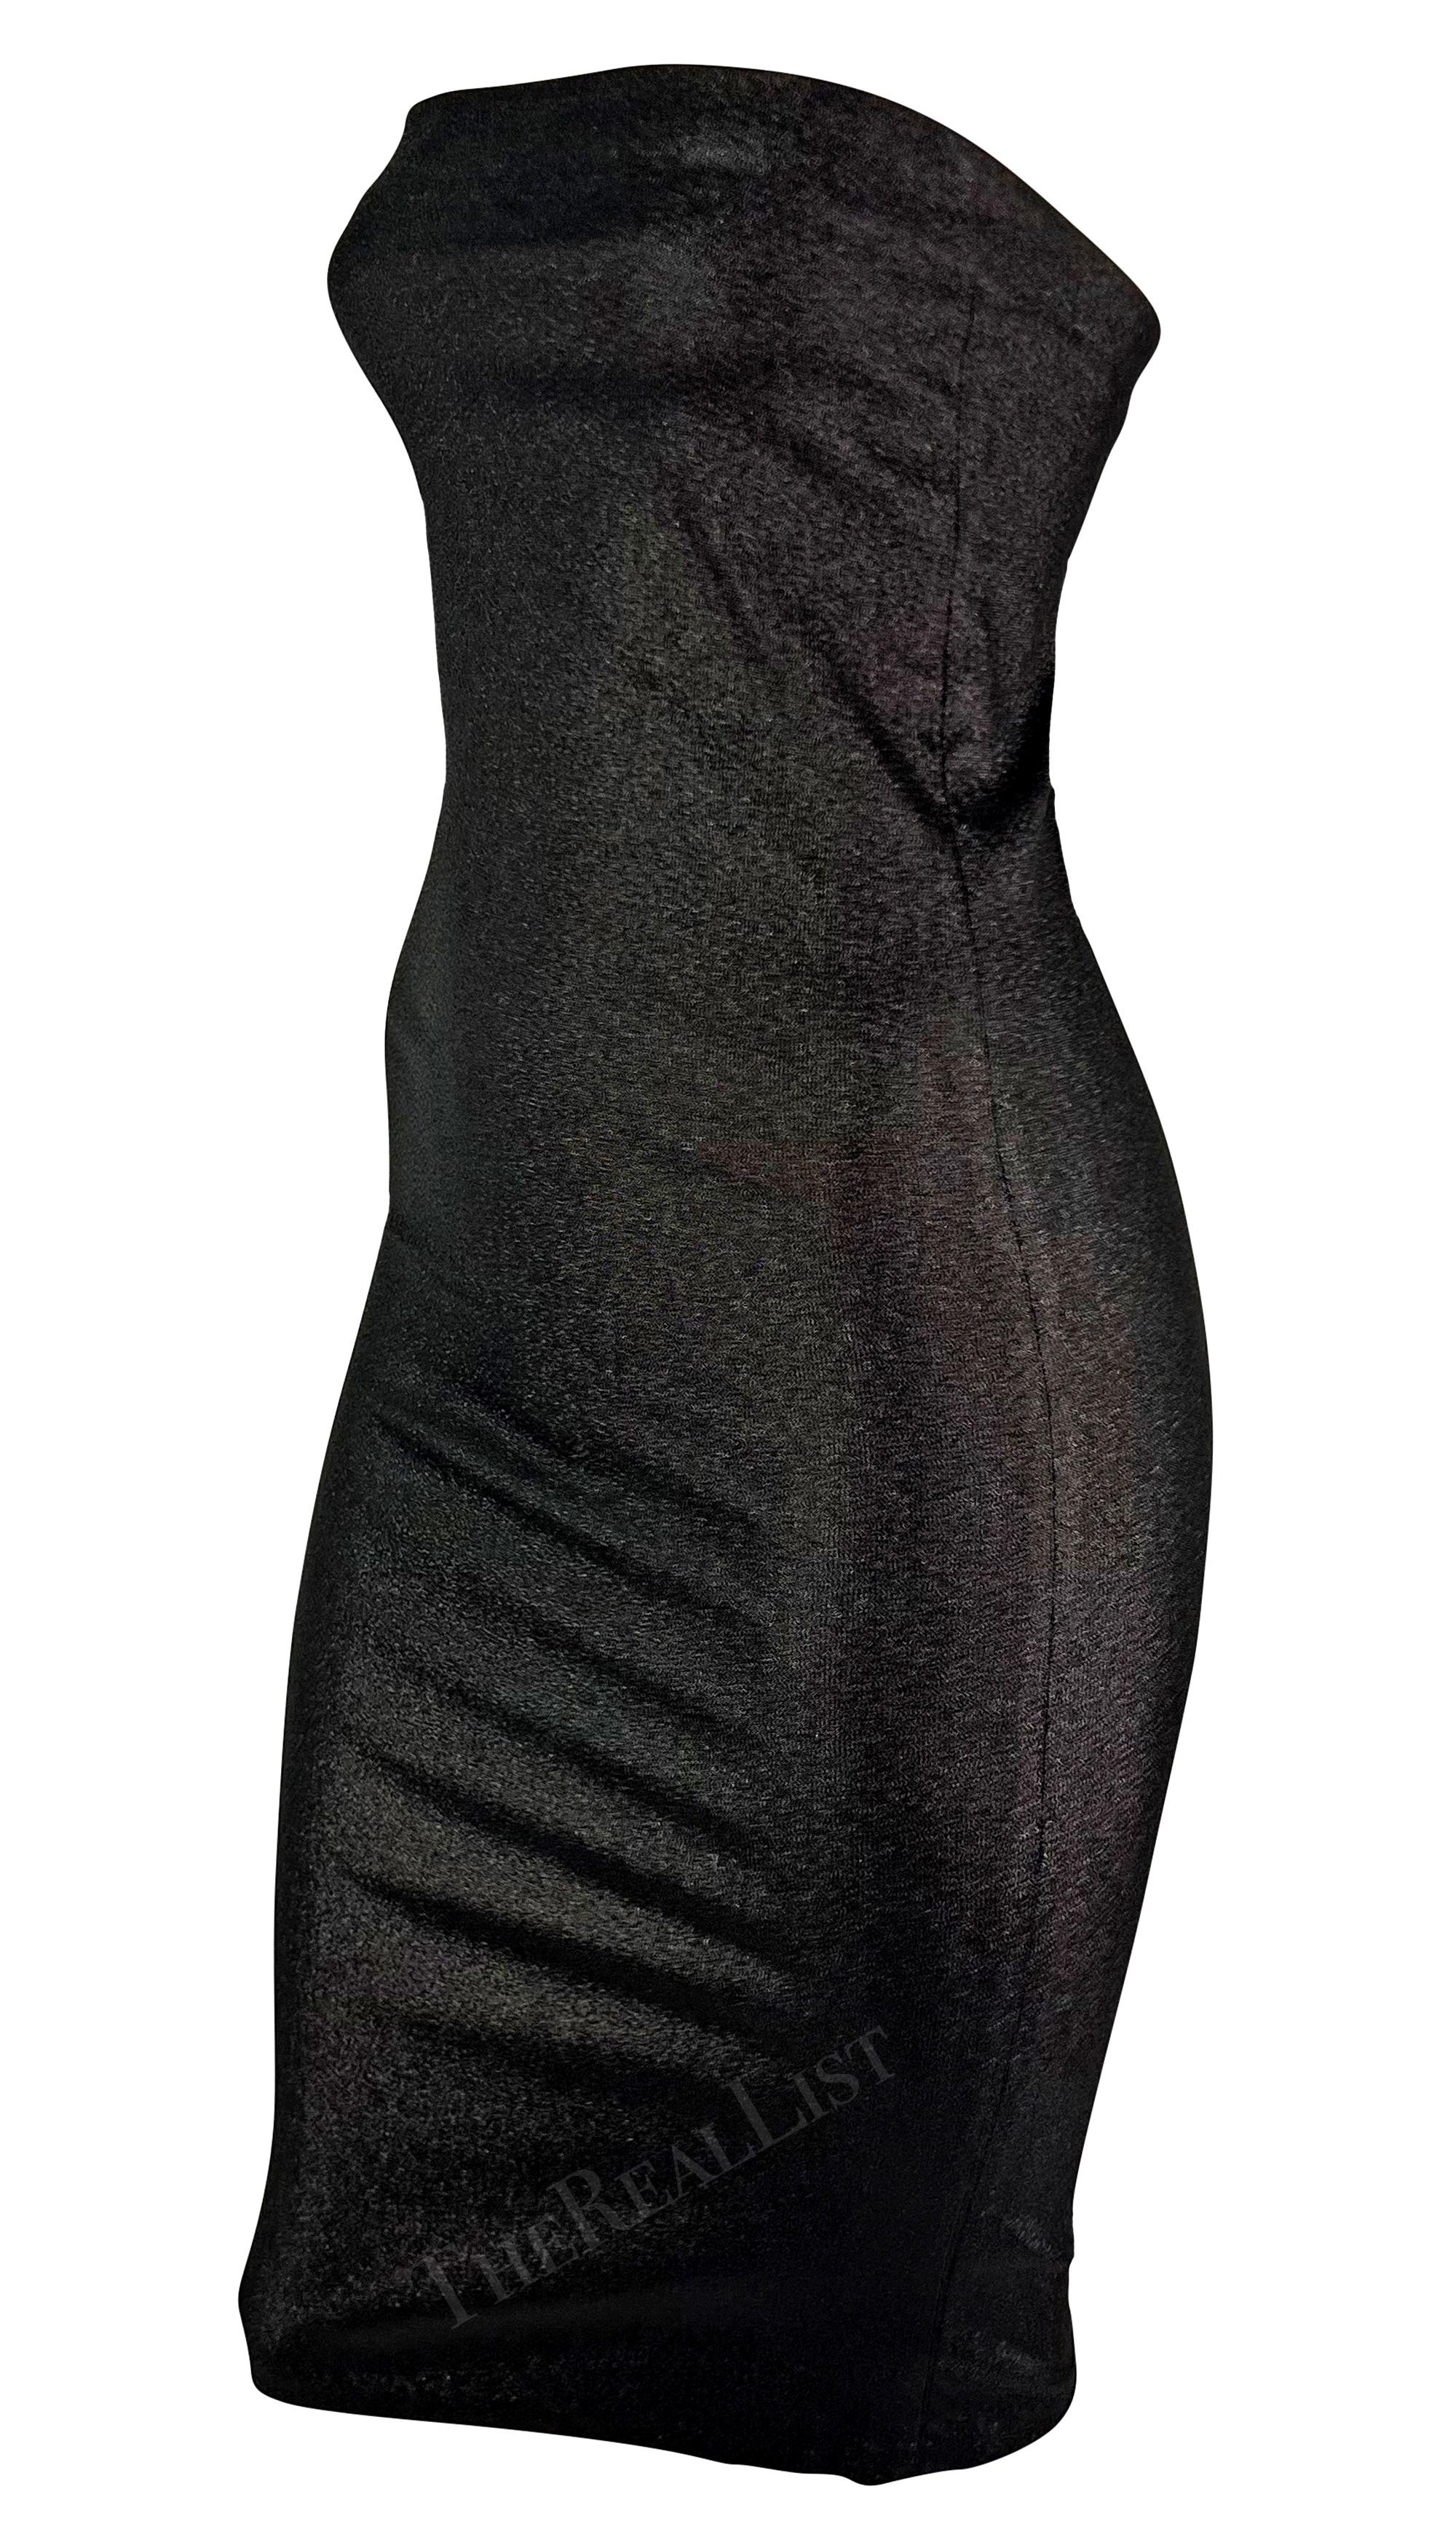 S/S 1997 Gucci by Tom Ford Brown Lurex Metallic Stretch Strapless Tube Dress In Excellent Condition For Sale In West Hollywood, CA